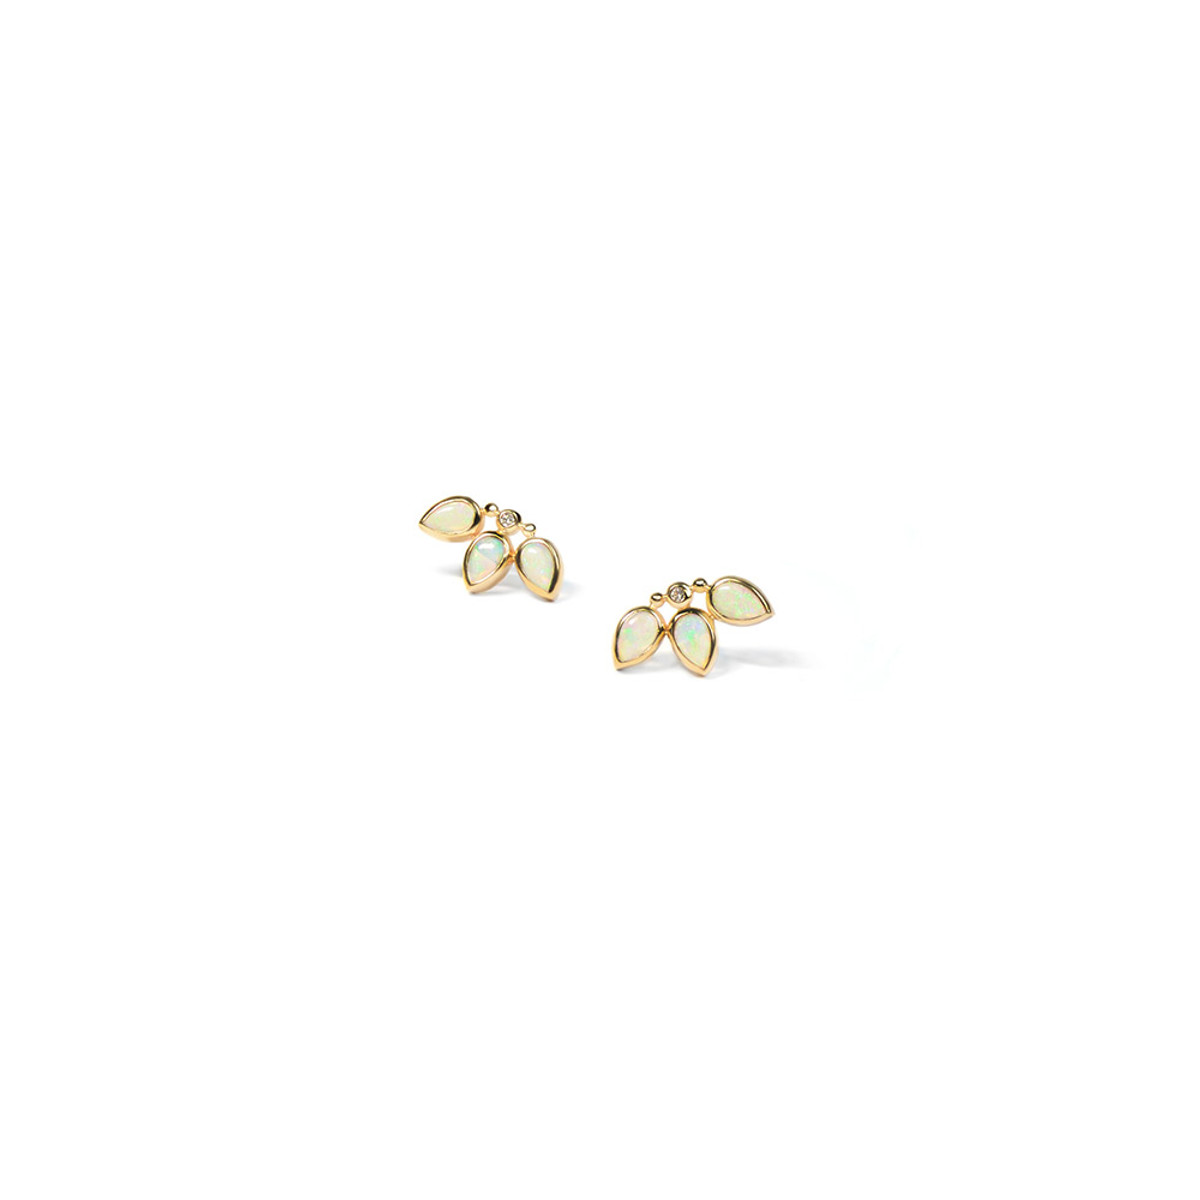 Hyde Park 14K Yellow Gold Floral Bouquet Opal Stud Earrings-39591 Product Image